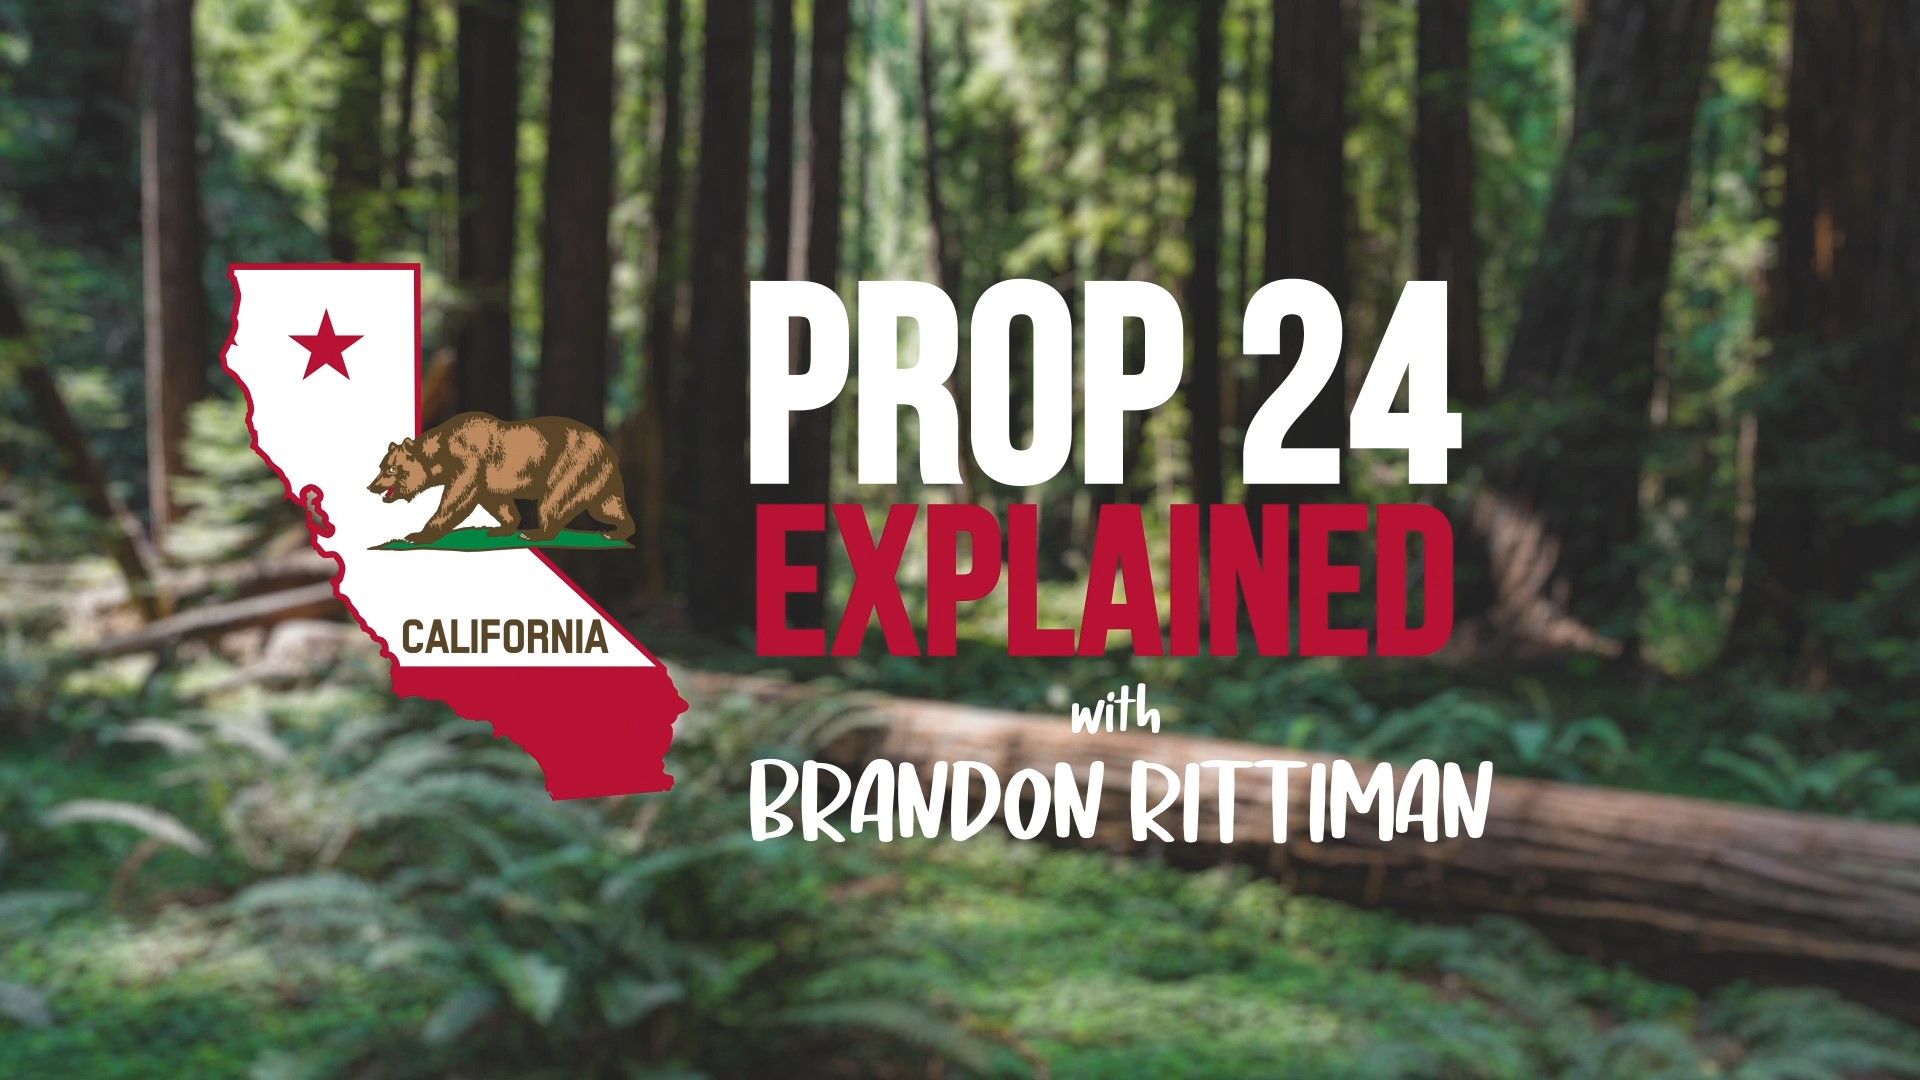 ABC10's Brandon Rittiman takes a closer look at California Proposition 24, Consumer Personal Information Law and Agency Initiative.